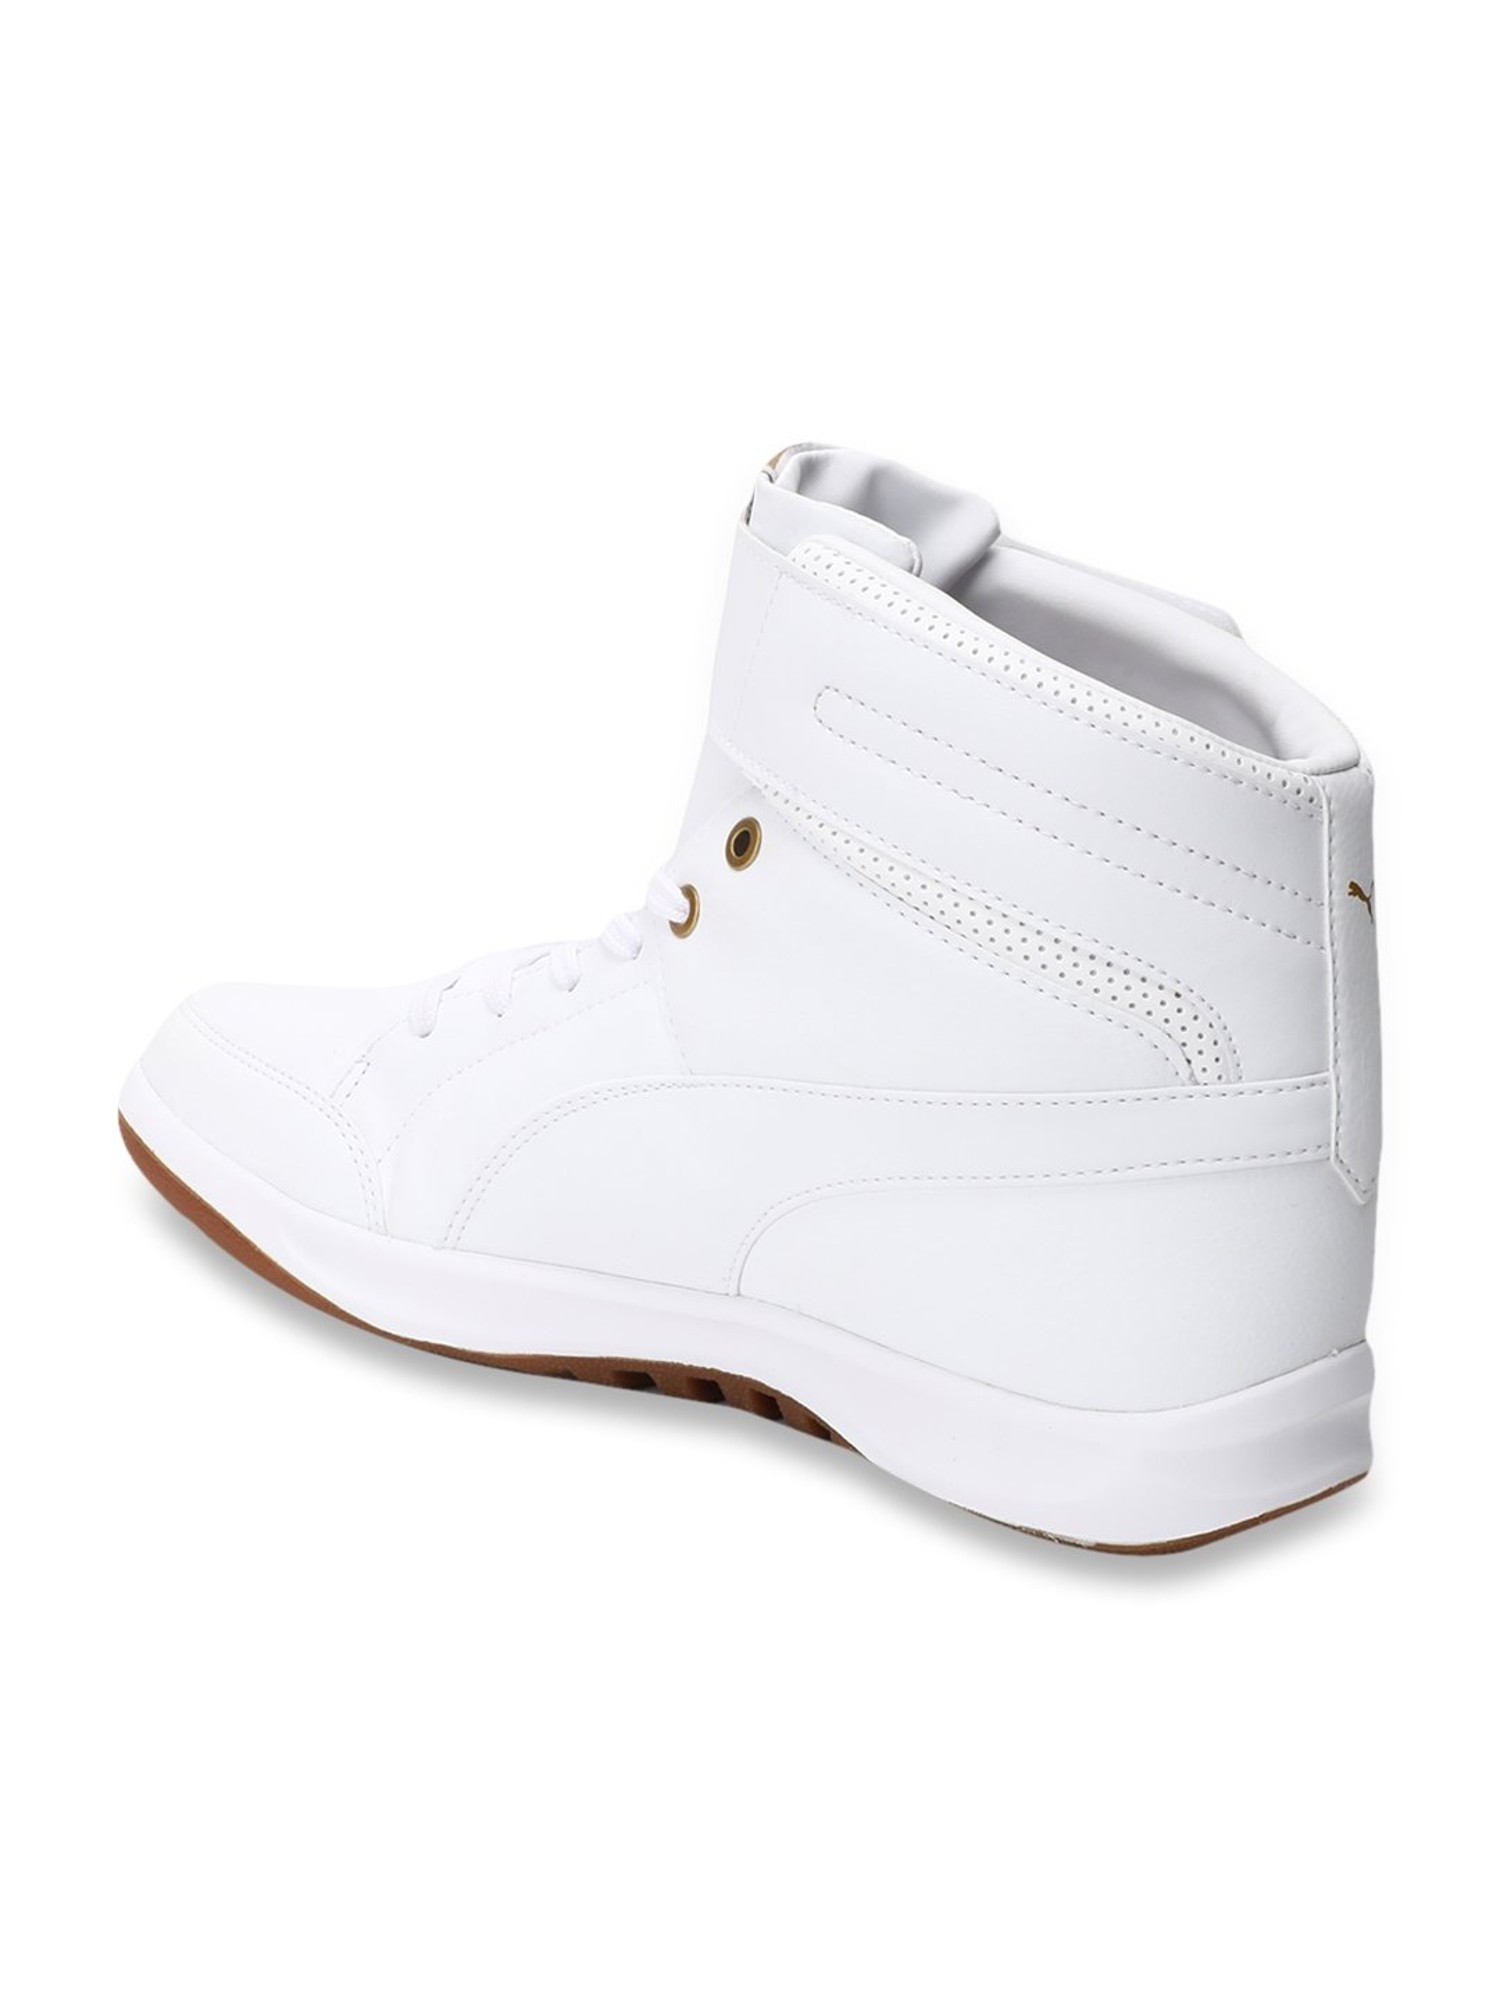 Puma One8 Prime Mid White Ankle High 